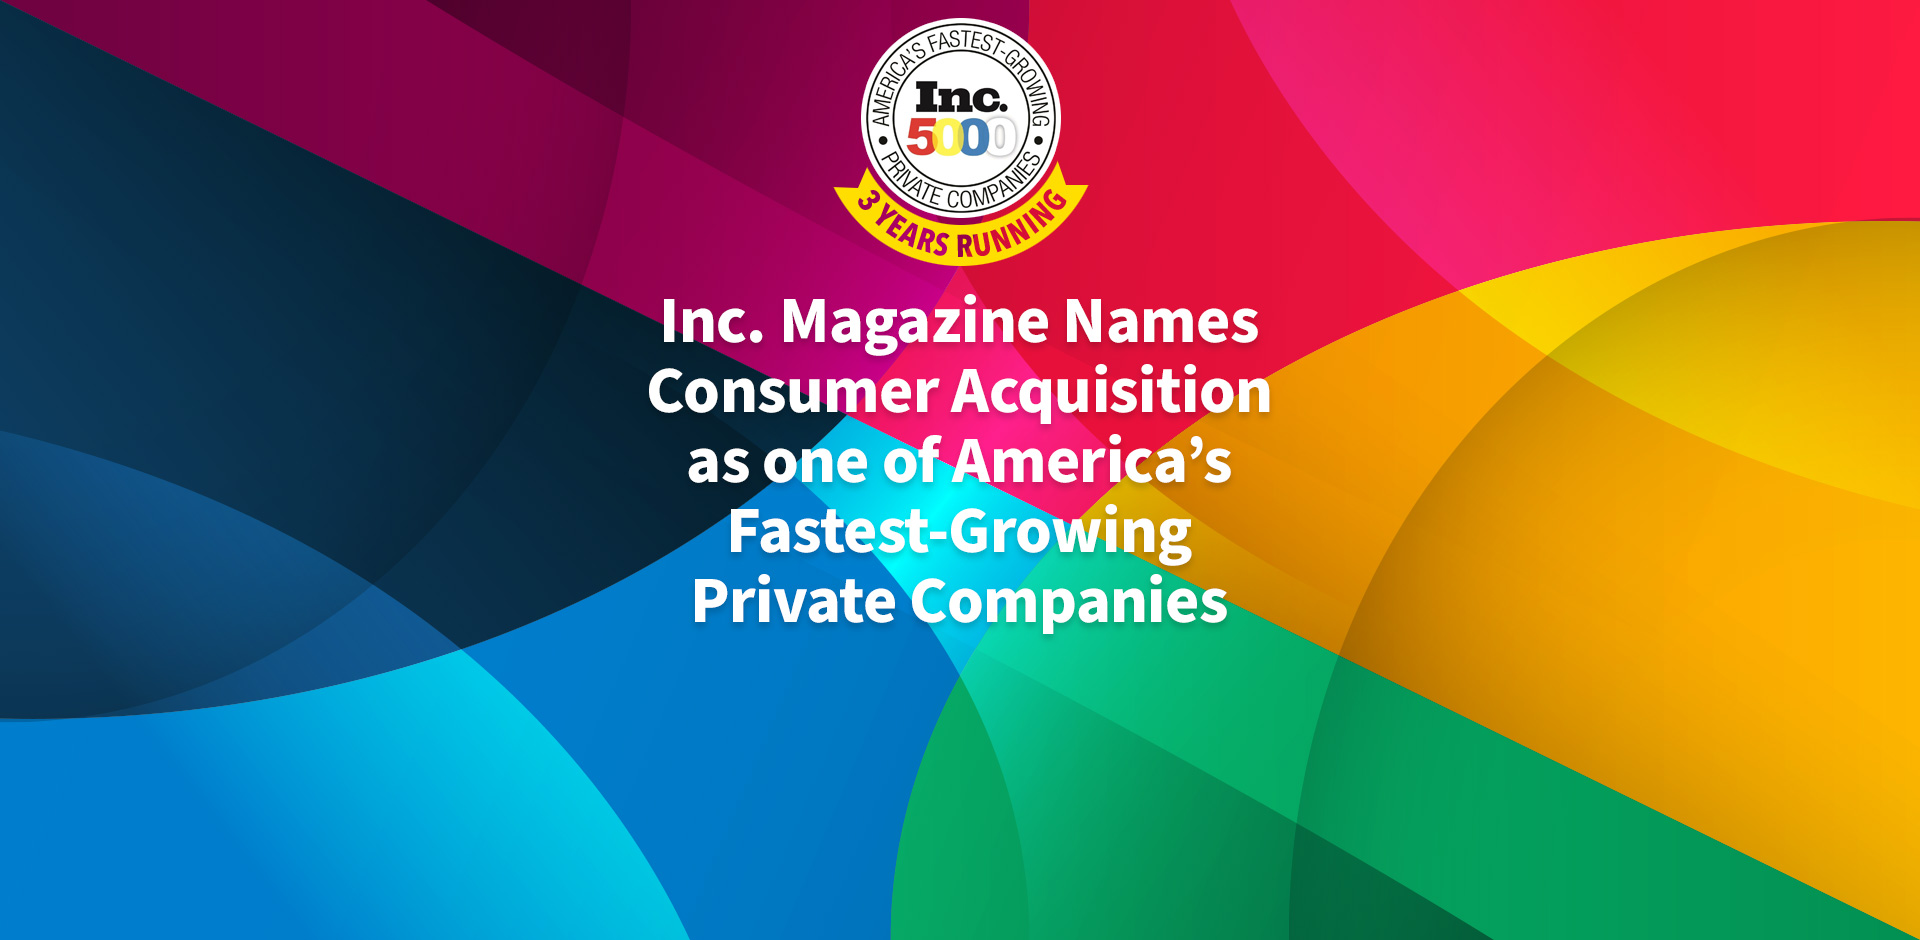 Inc. Magazine Names Consumer Acquisition as one of America’s Fastest-Growing Private Companies